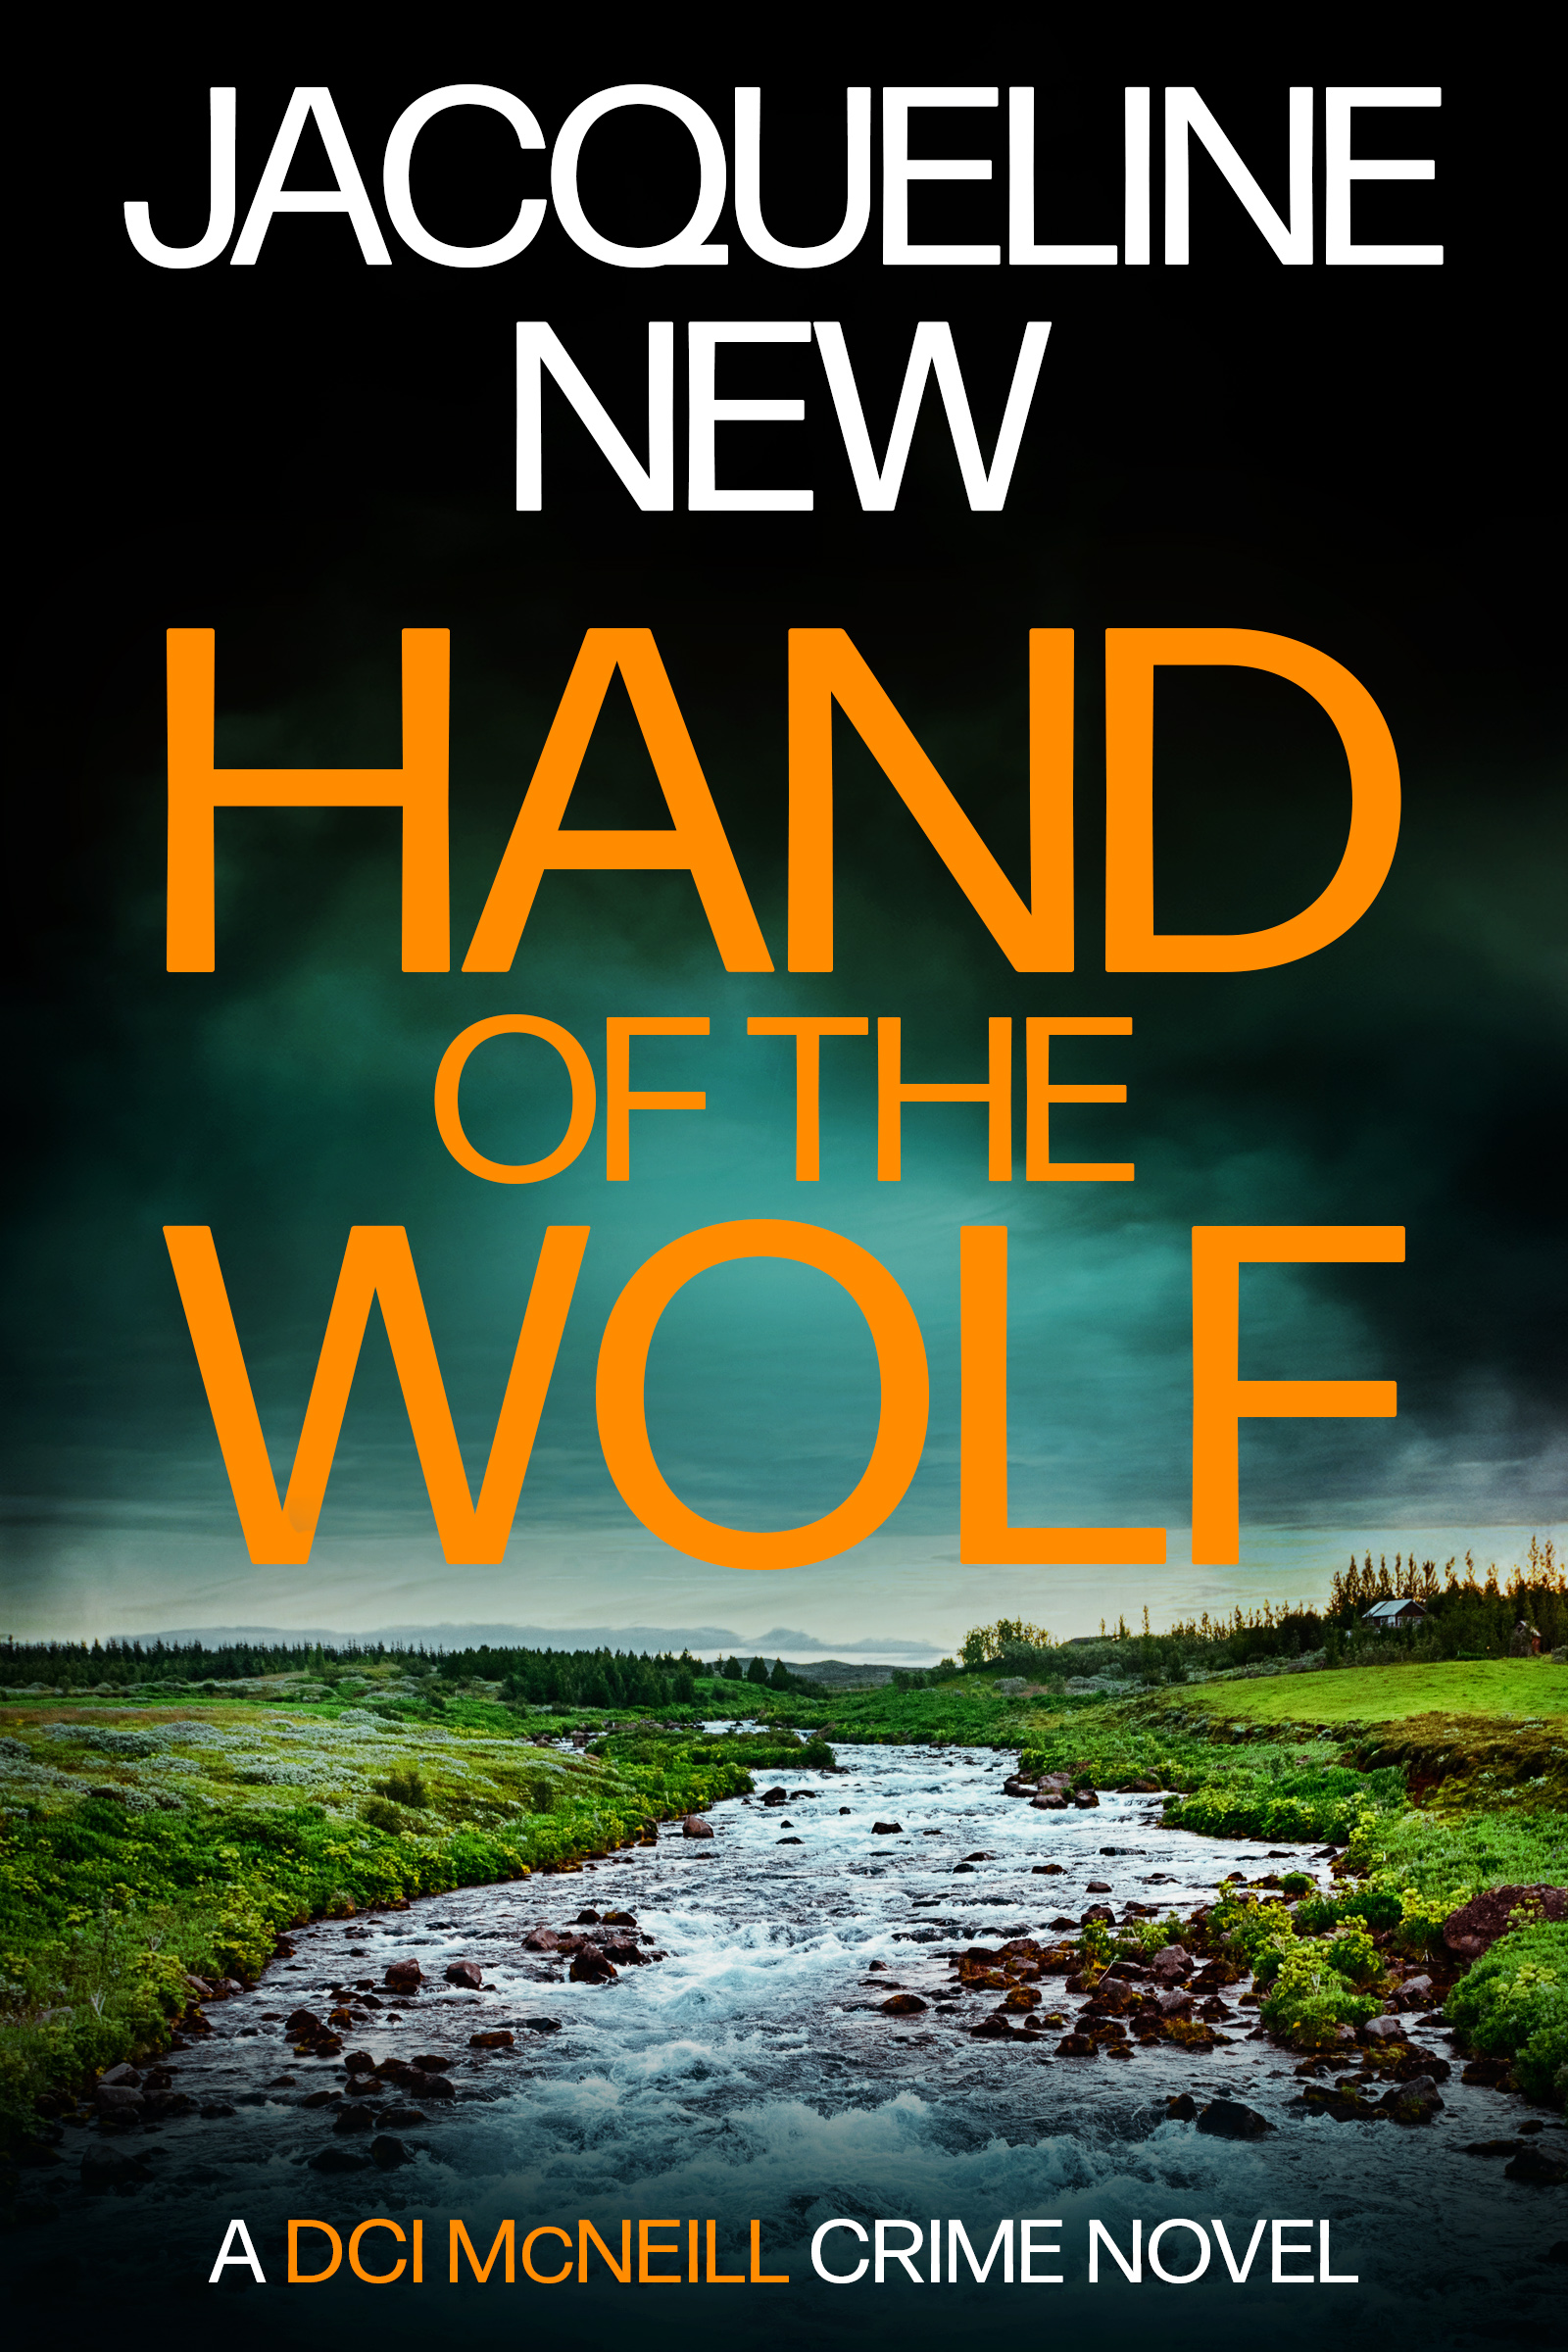 Hand of the Wolf book 3 in the bestselling Scottish crime series by author Jacqueline New.